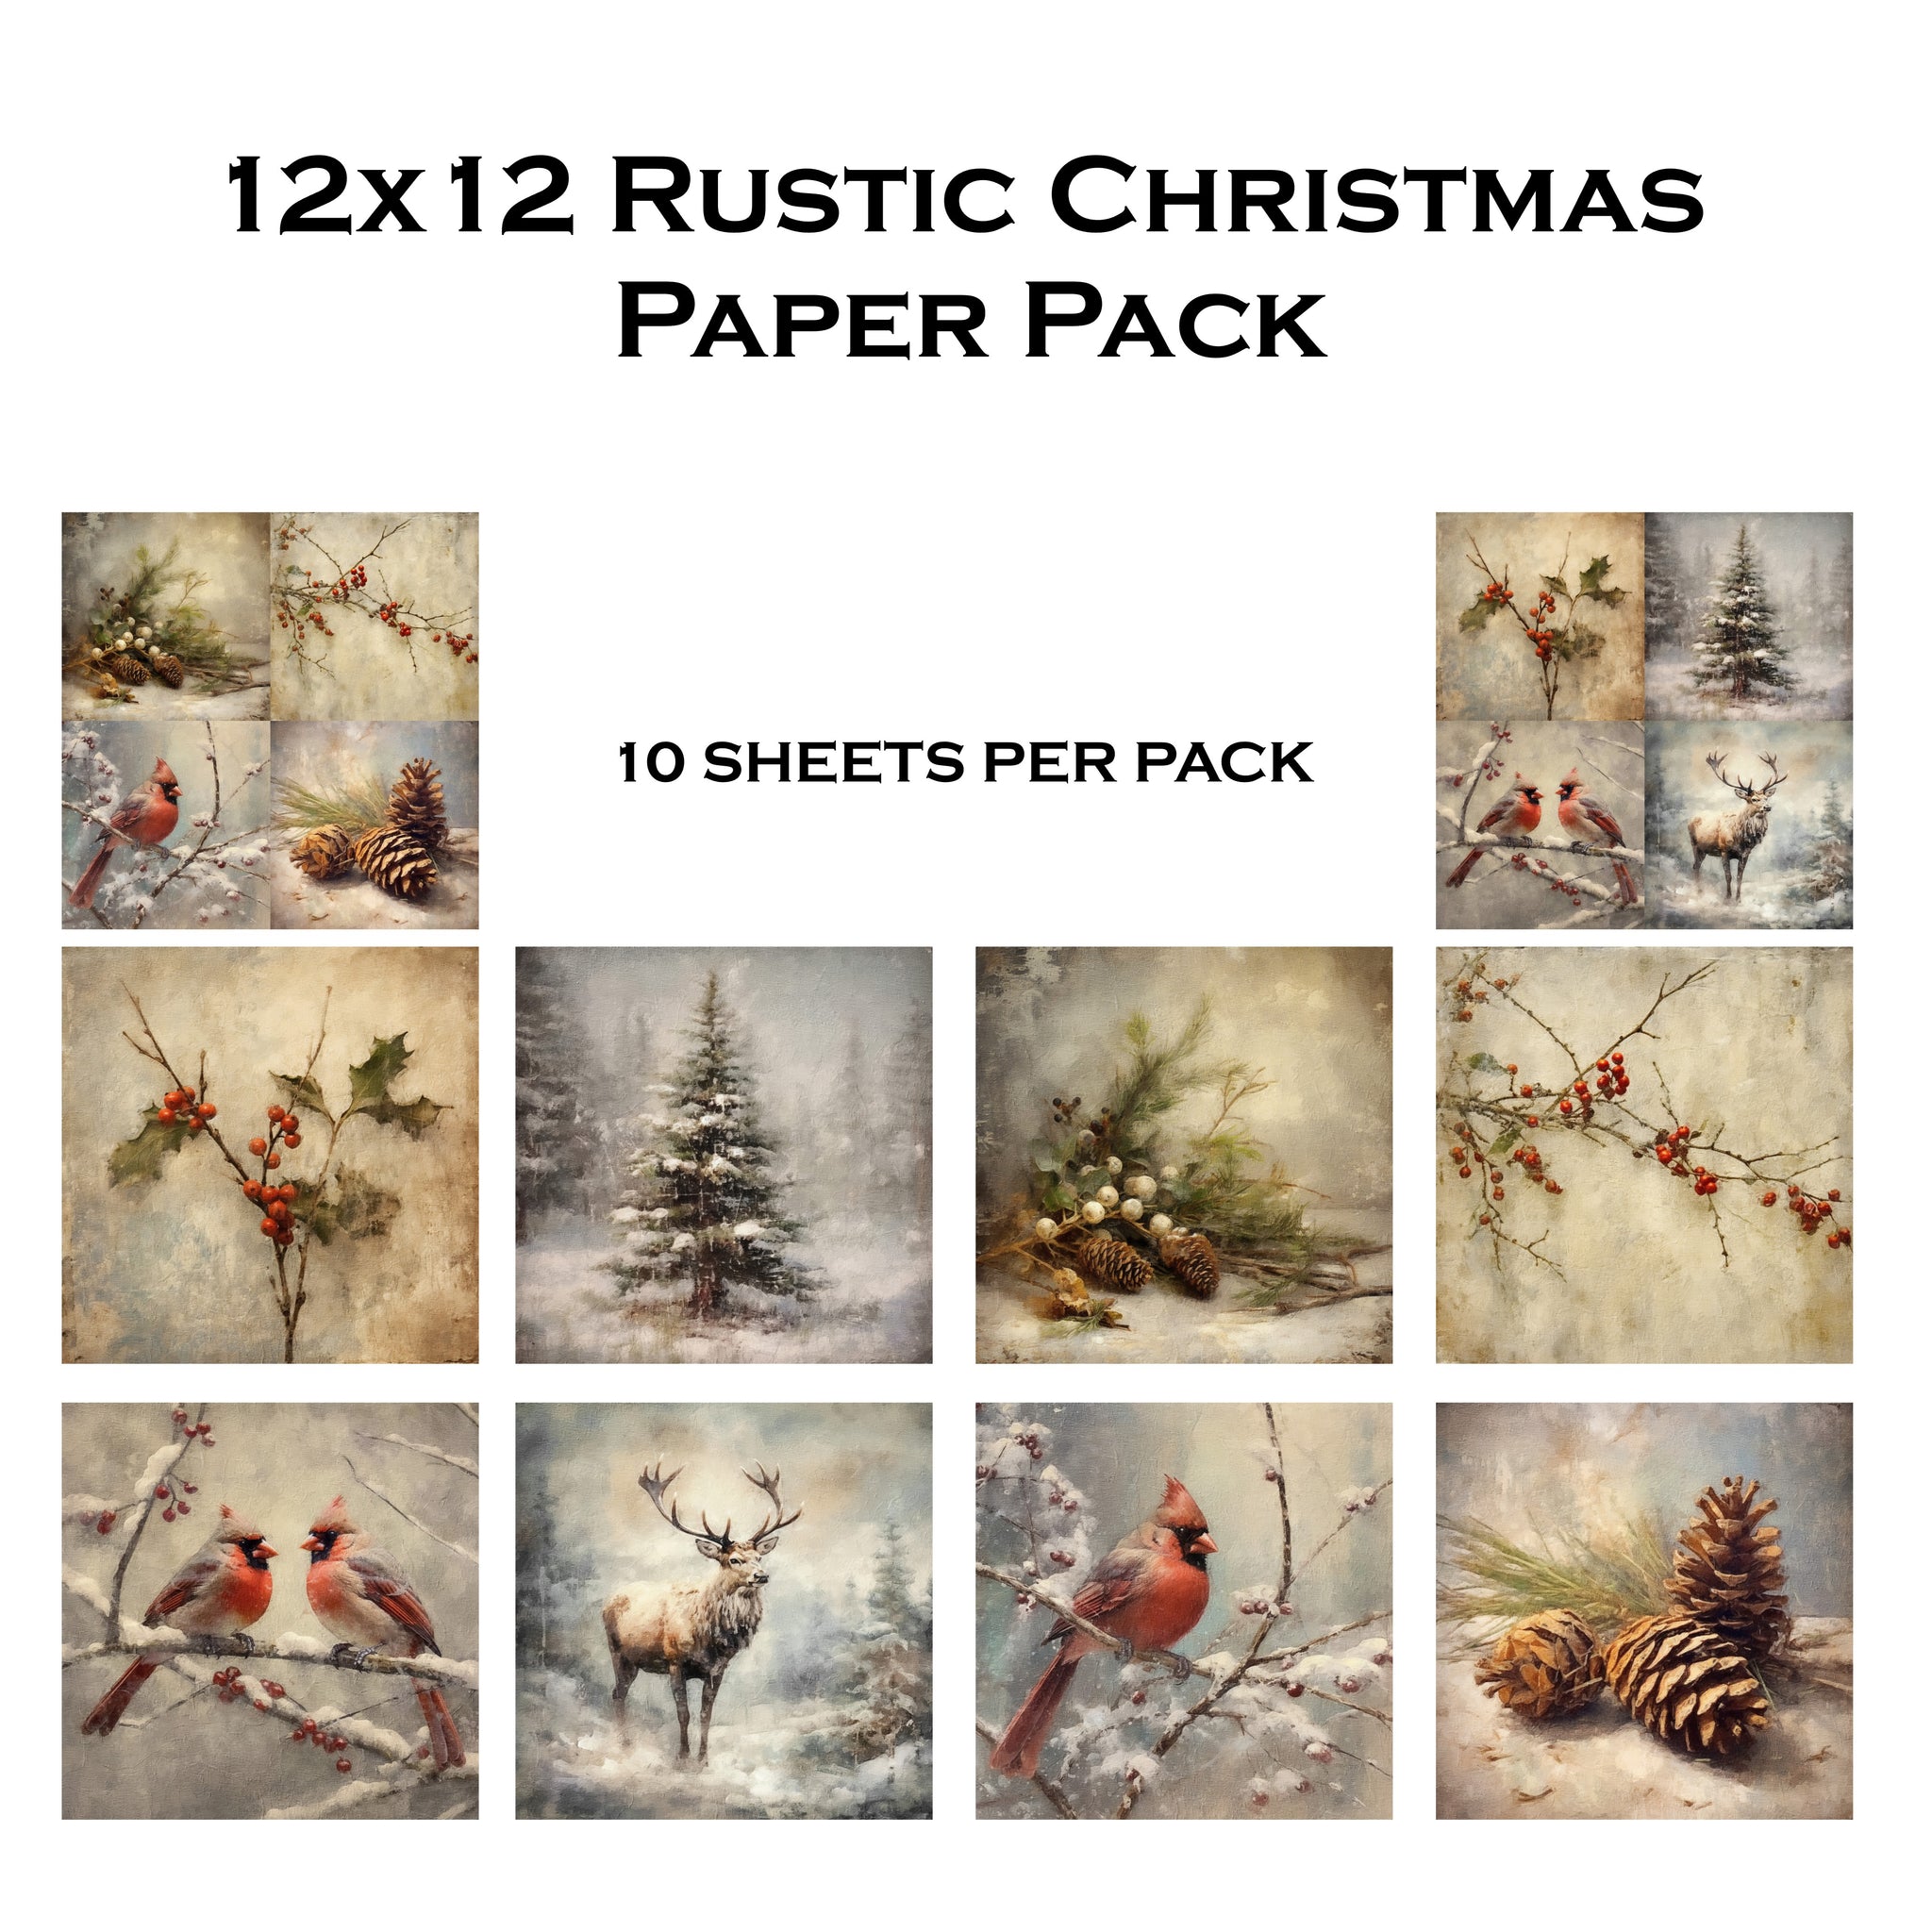 Rustic Christmas 12x12 Paper Pack